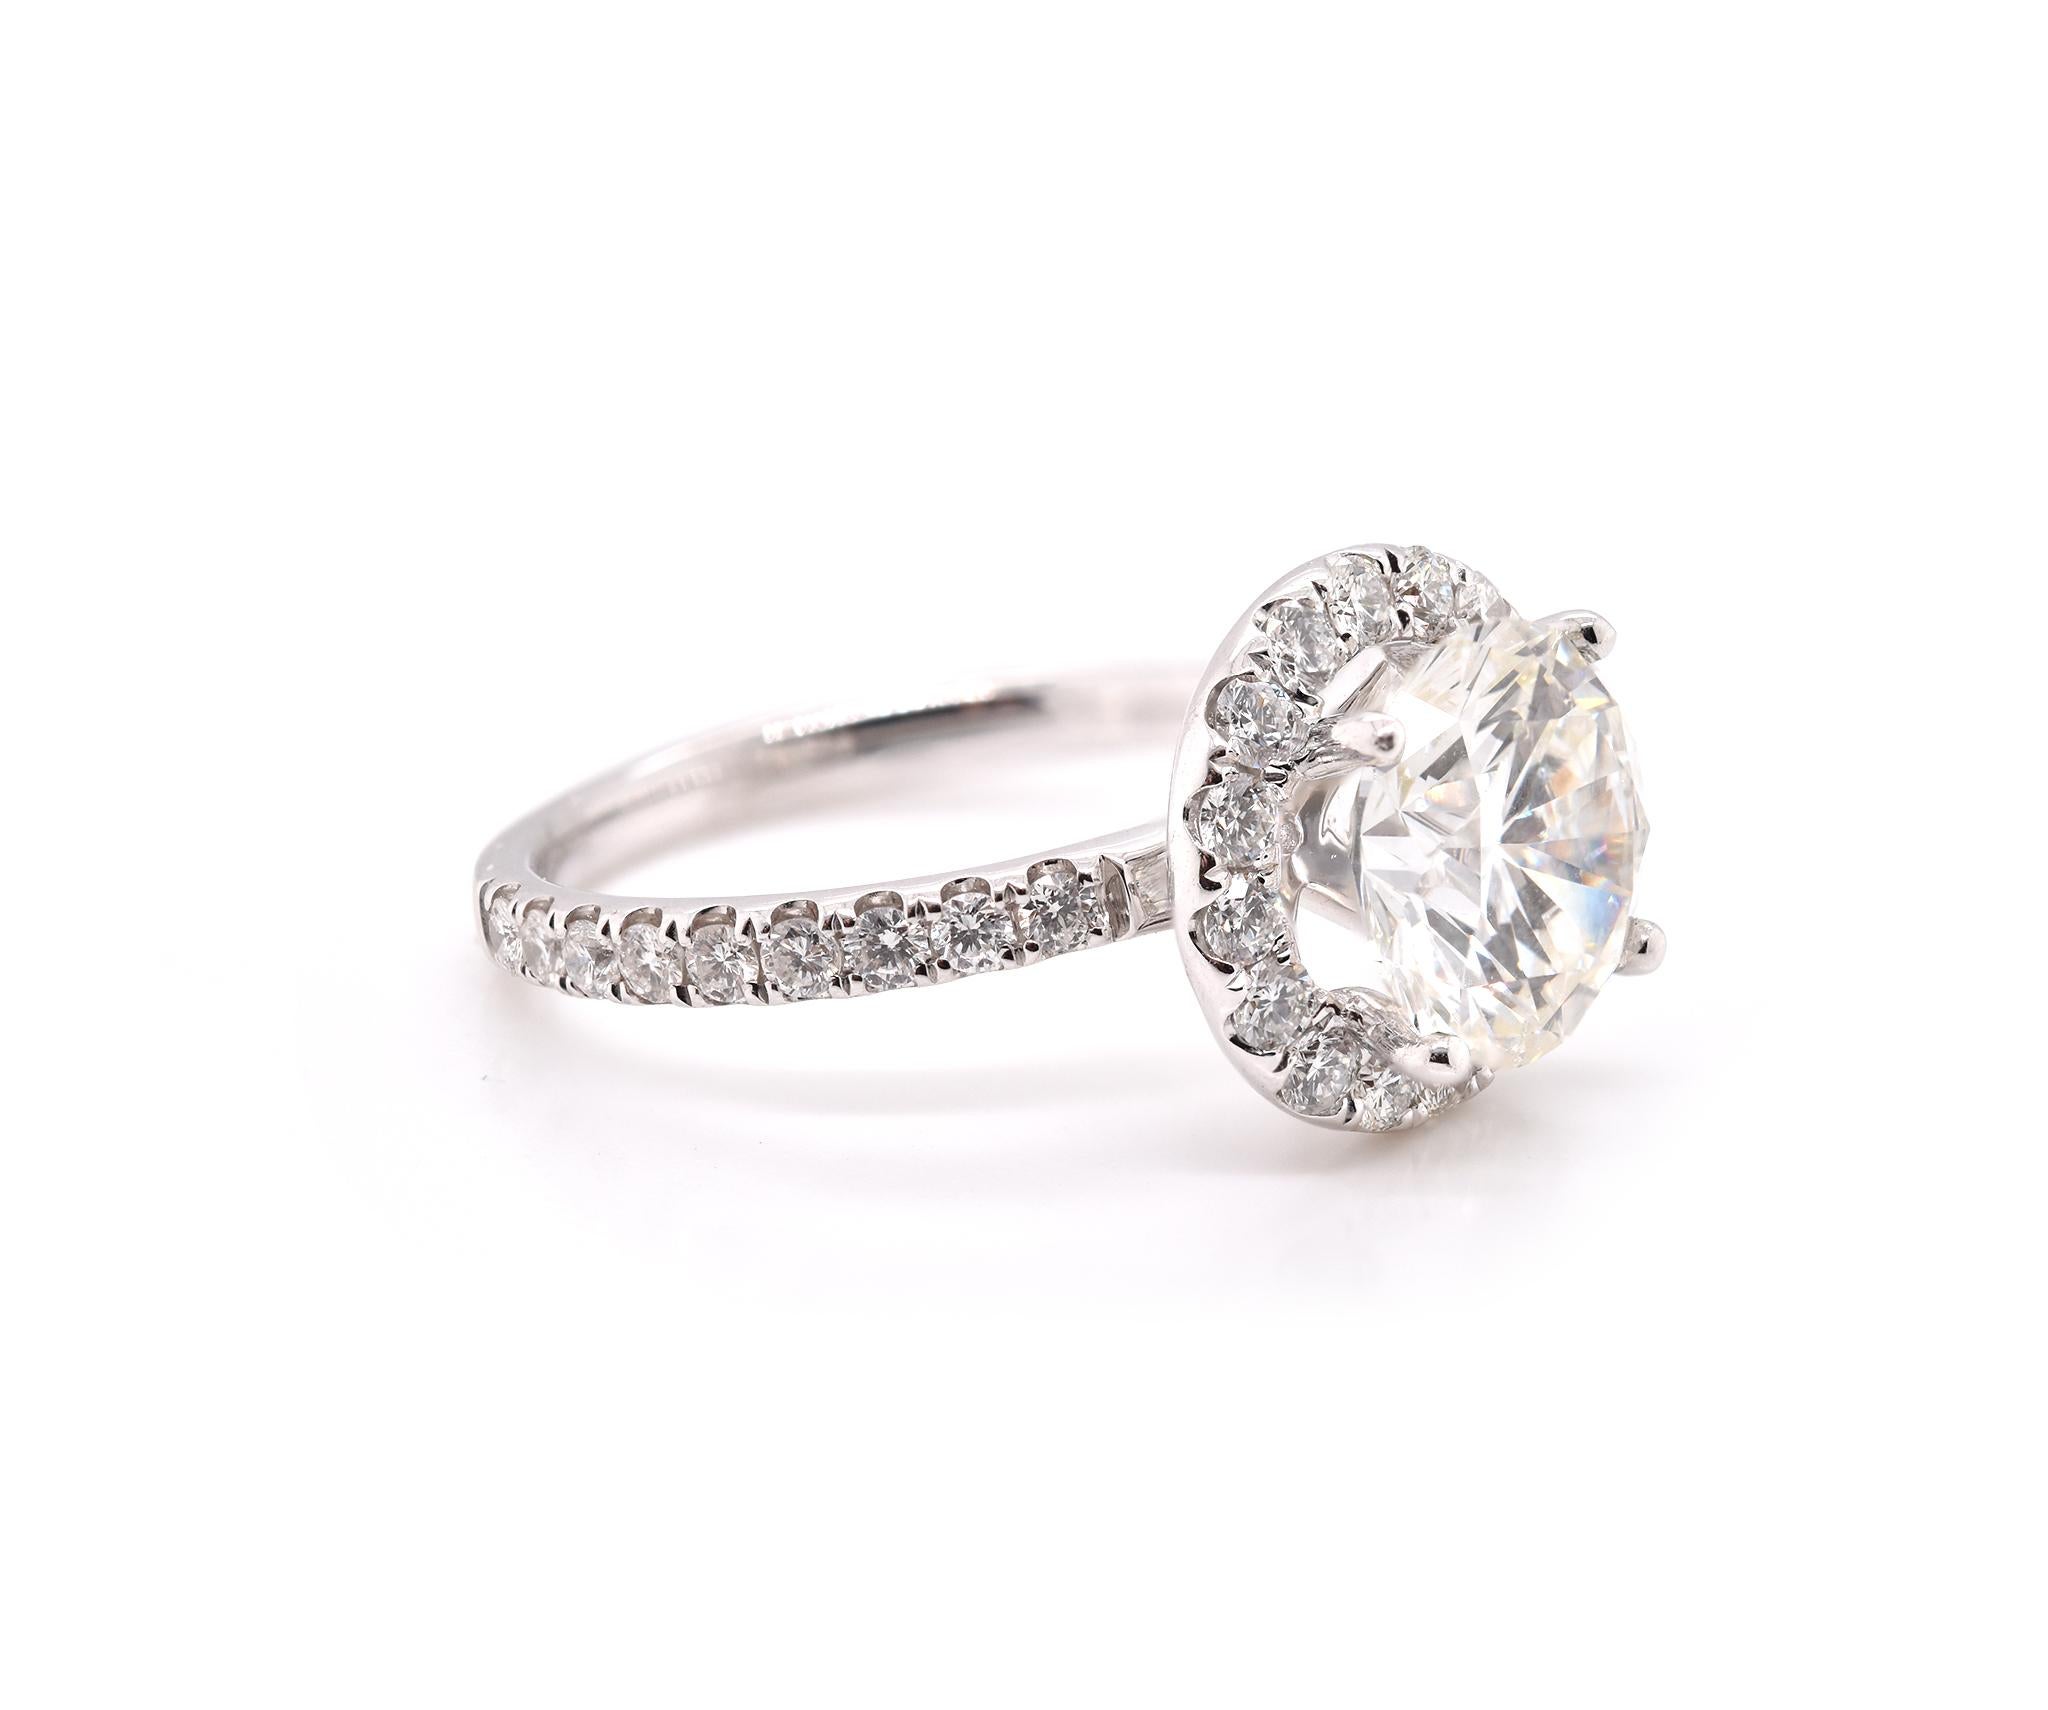 Designer: custom design
Material: 14k white gold
Center Diamond: 1 round brilliant cut = 3.03ct
Color: K
Clarity: I1
Diamonds: 33D= .66cttw
Color: G-H
Clarity: VS2-SI1
Ring Size: 7 (please allow two additional shipping days for sizing